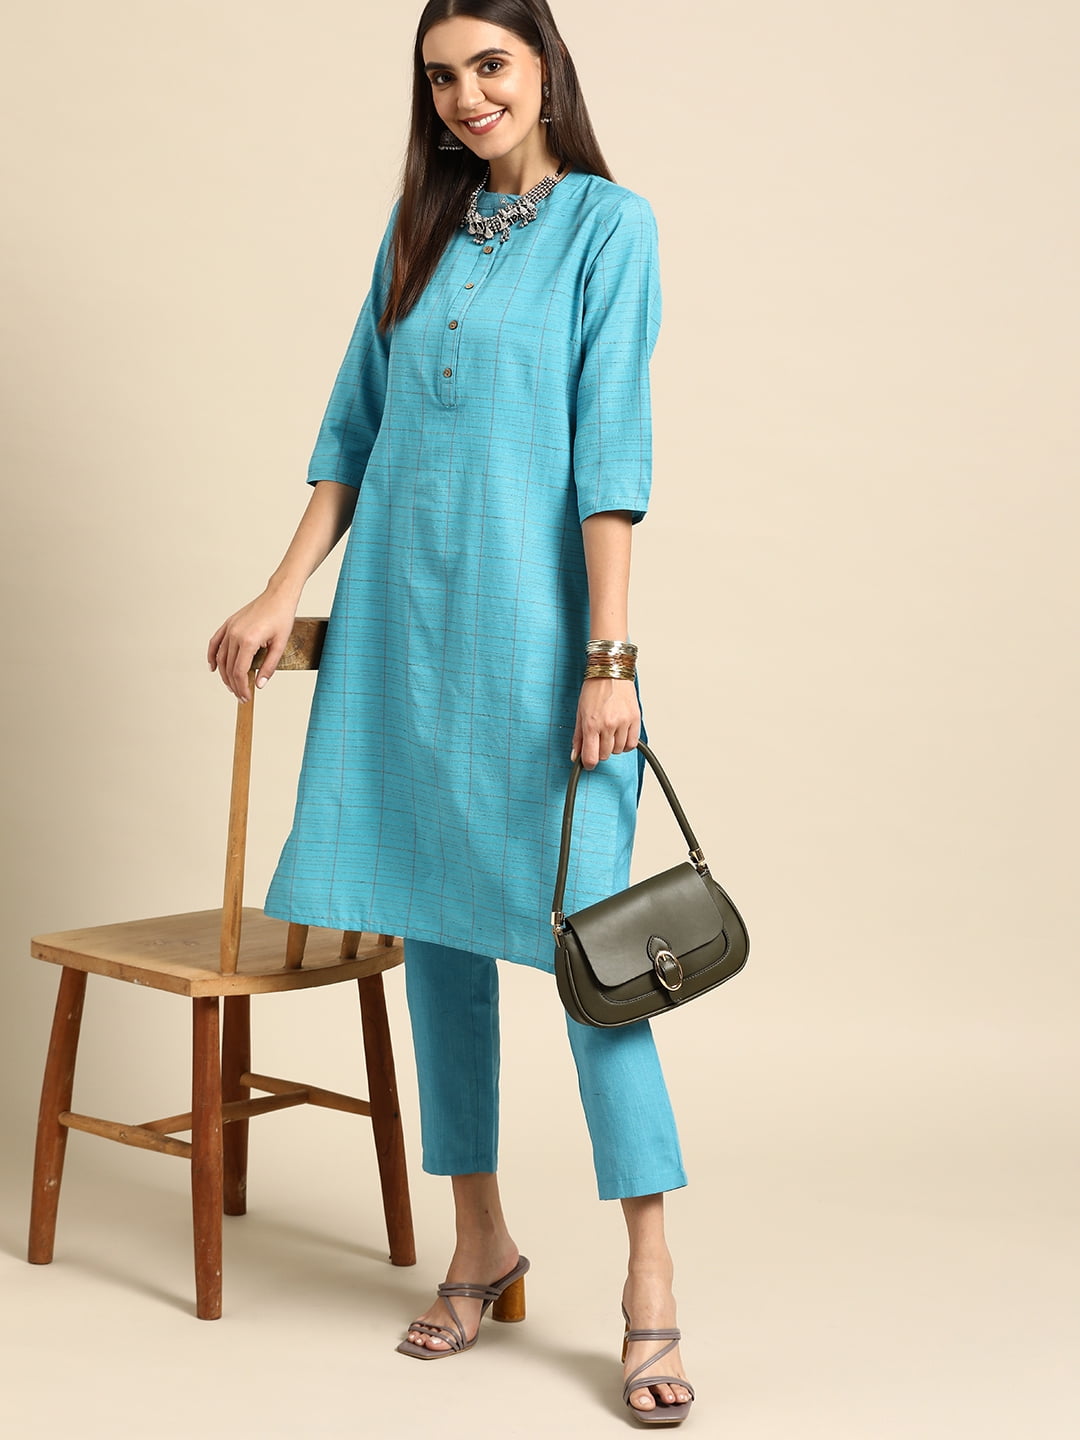 Myntra releases its spring-summer collections | Functional Fashion